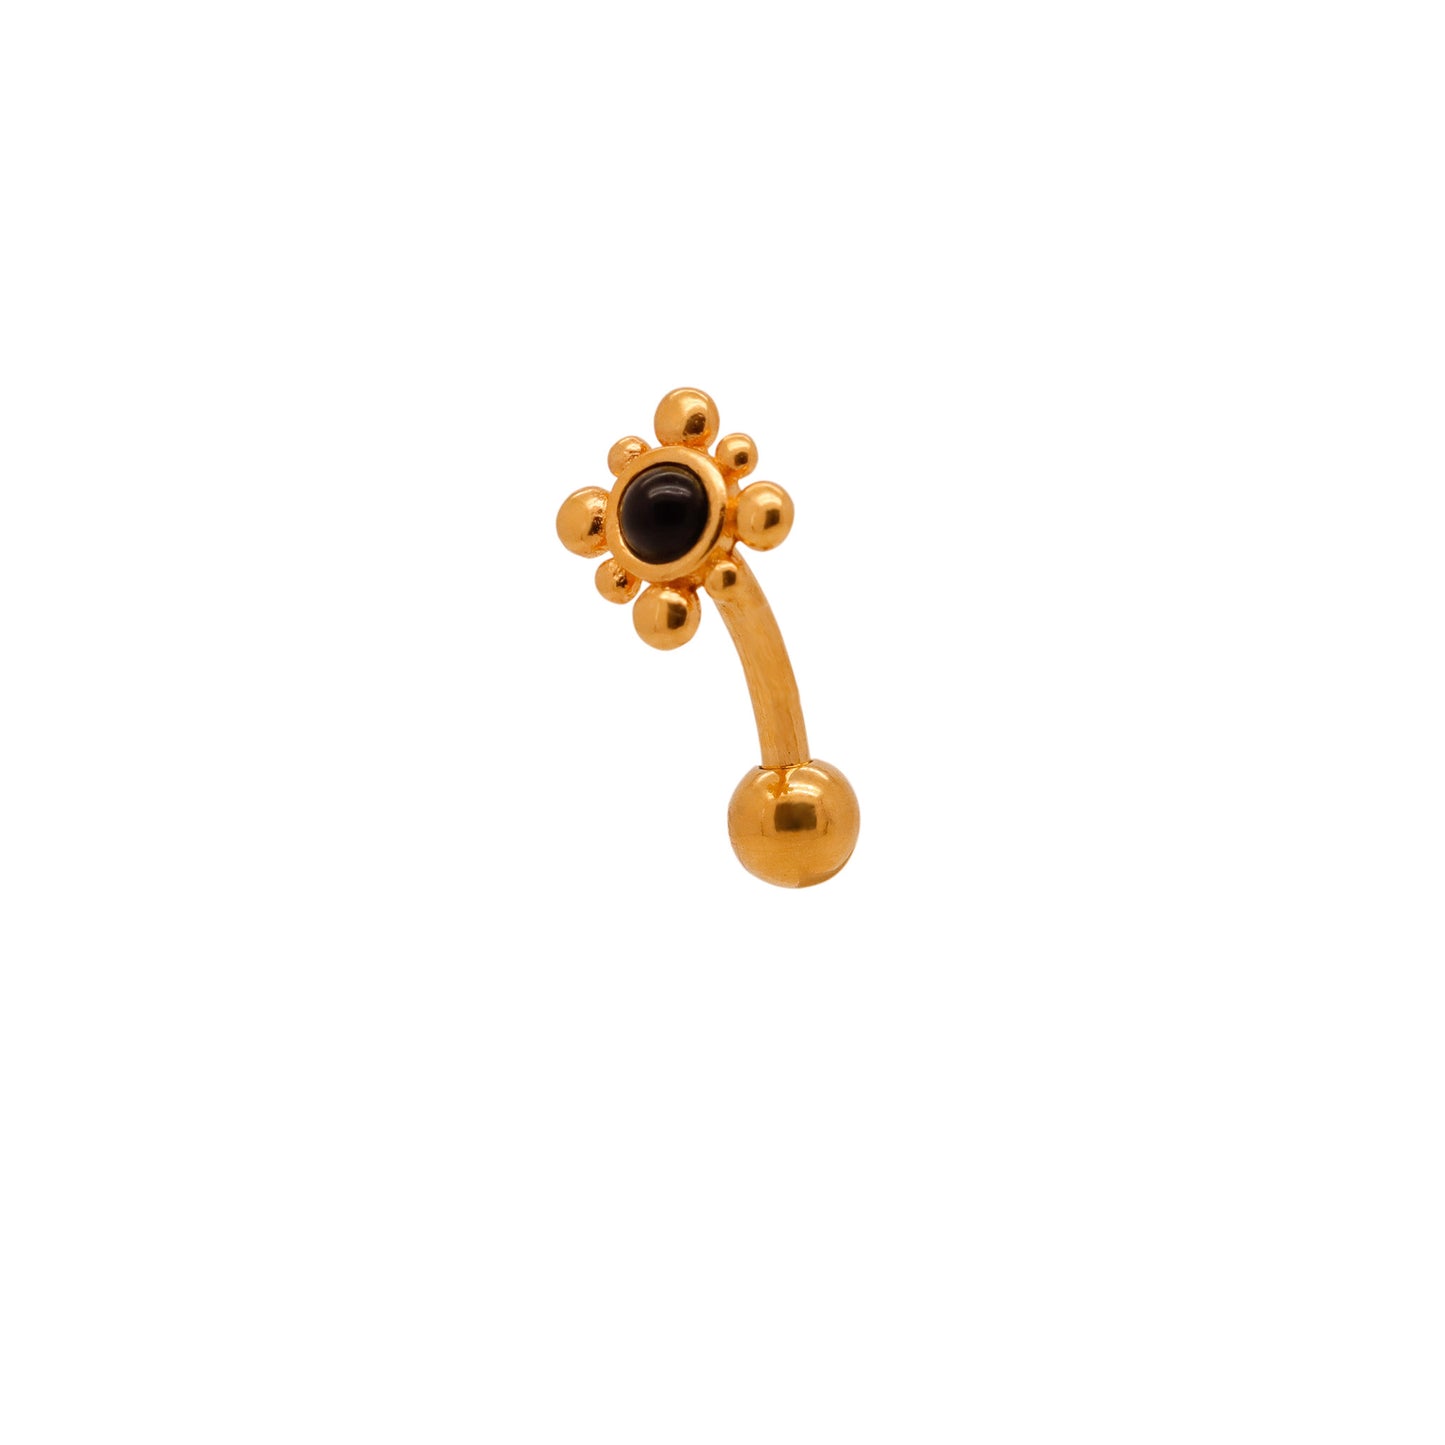 Vermeil | 925 Silver 24k Gold Coated 14G Black Petite Sun Reverse Belly Ring | 6mm 1/4" 8mm 5/16" 10mm 3/8" - Sturdy South